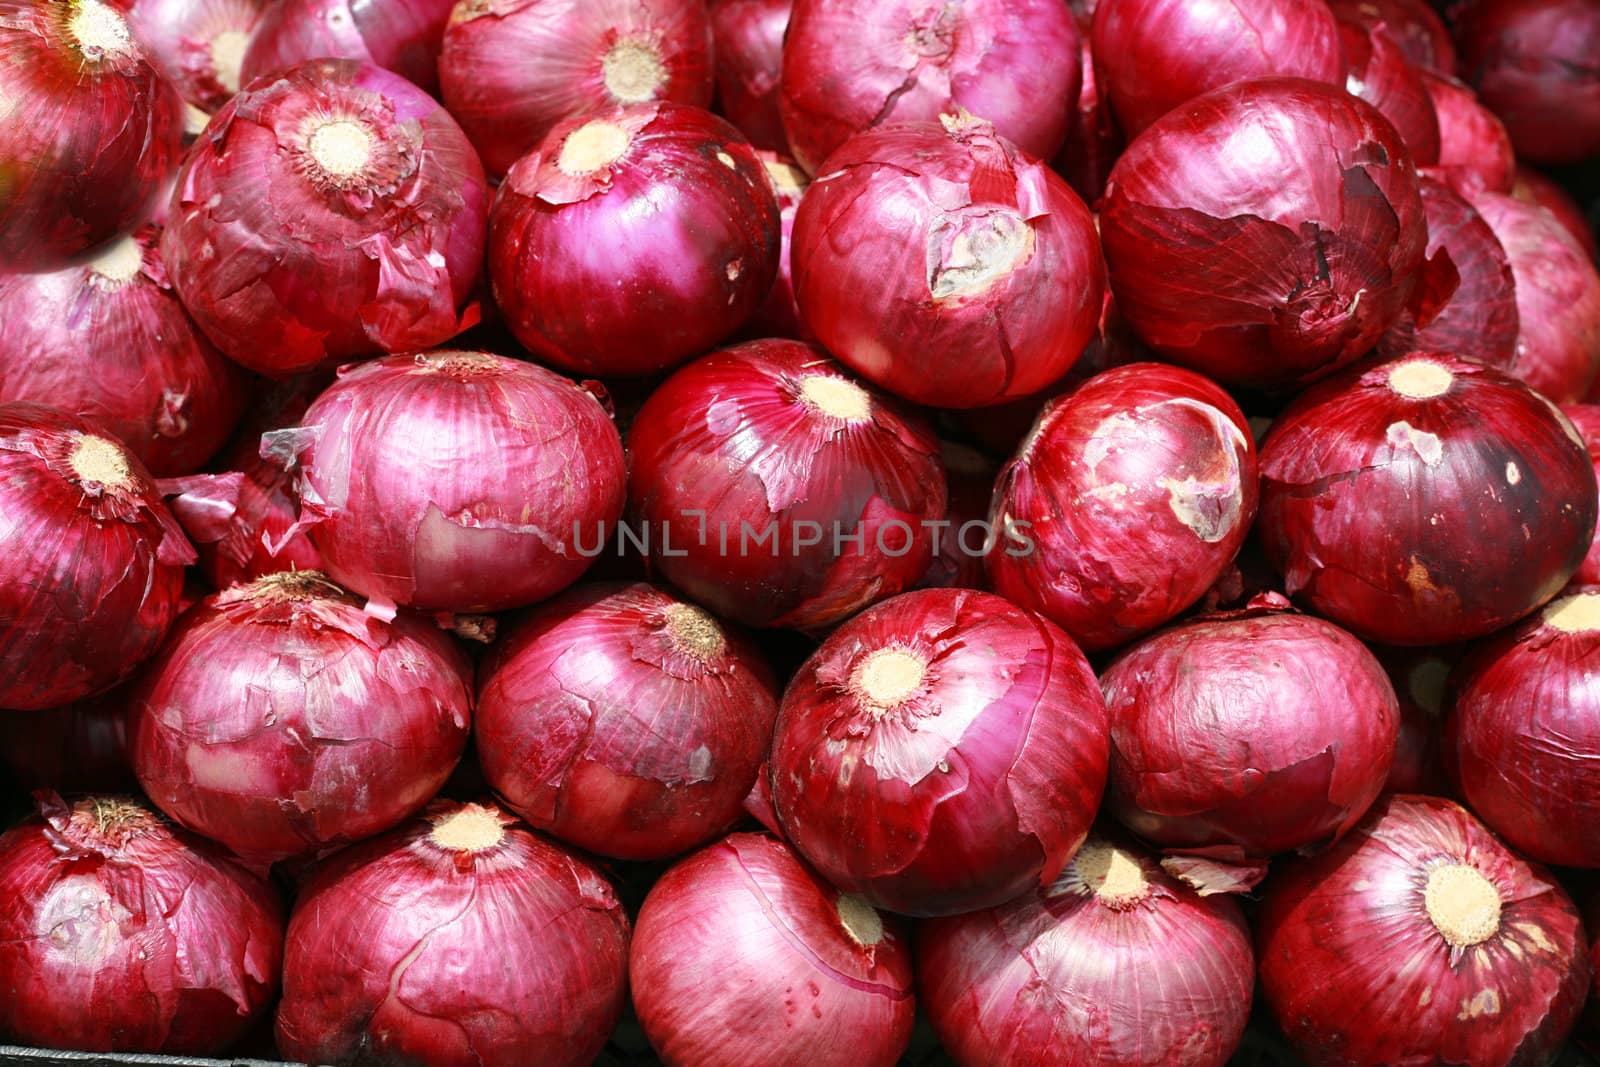 Harvested Red Onions in background